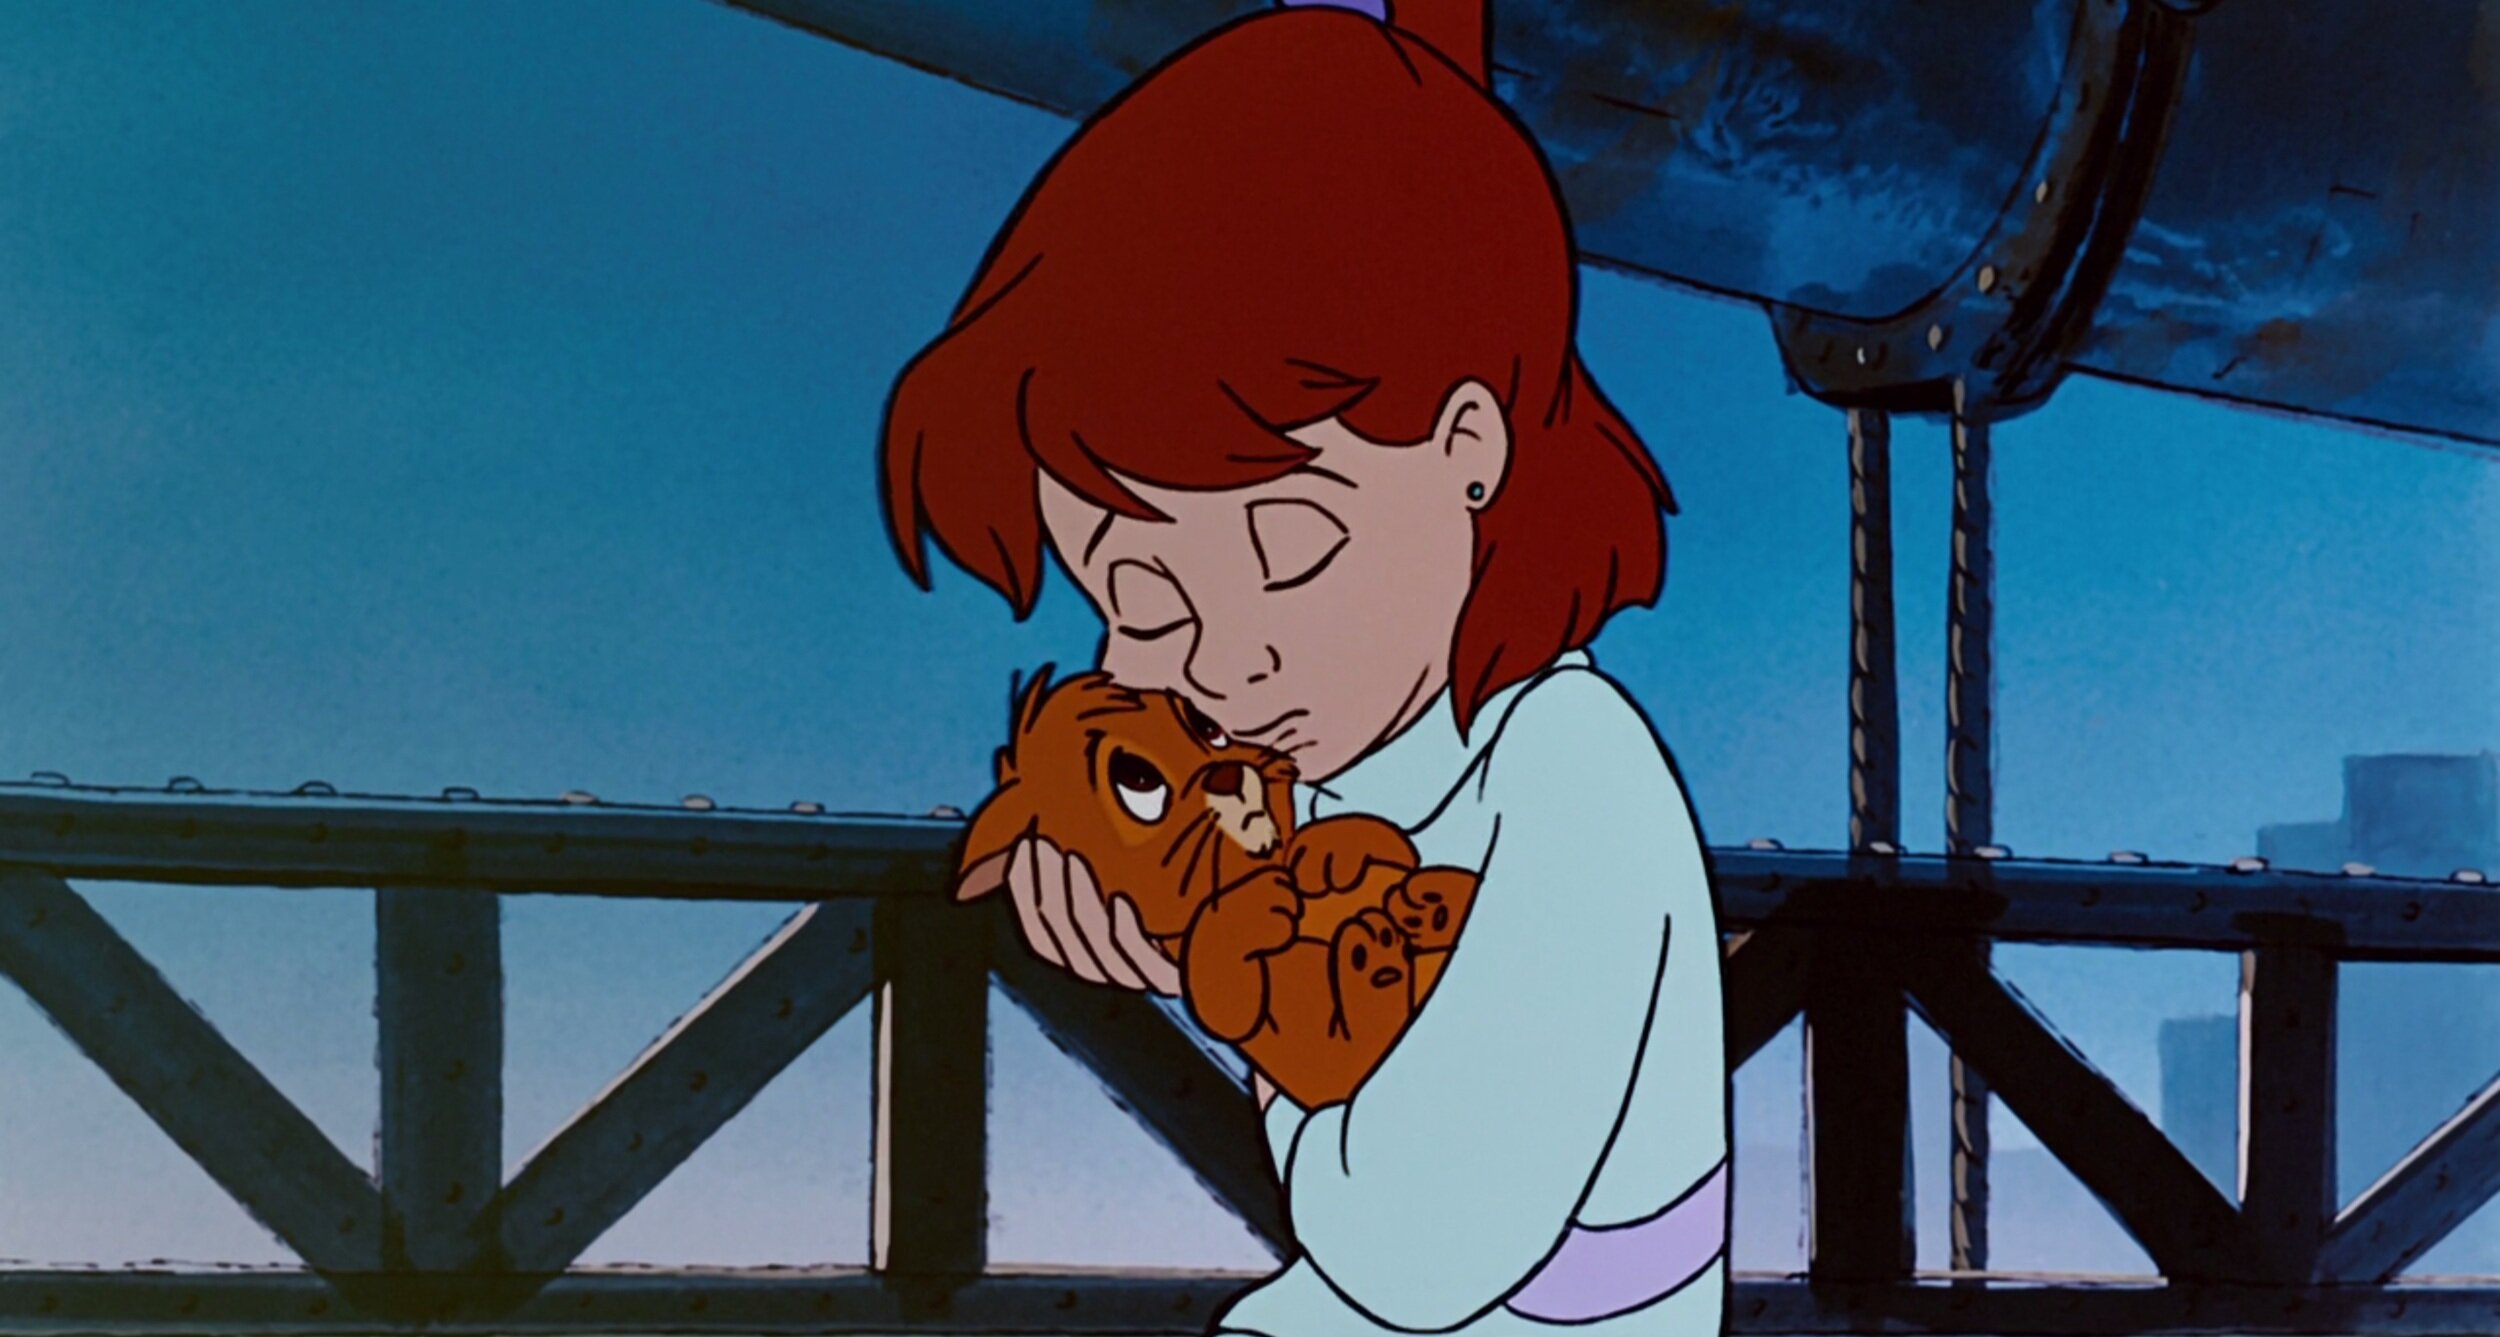   Oliver and Company (1988) , Walt Disney Feature Animation.  